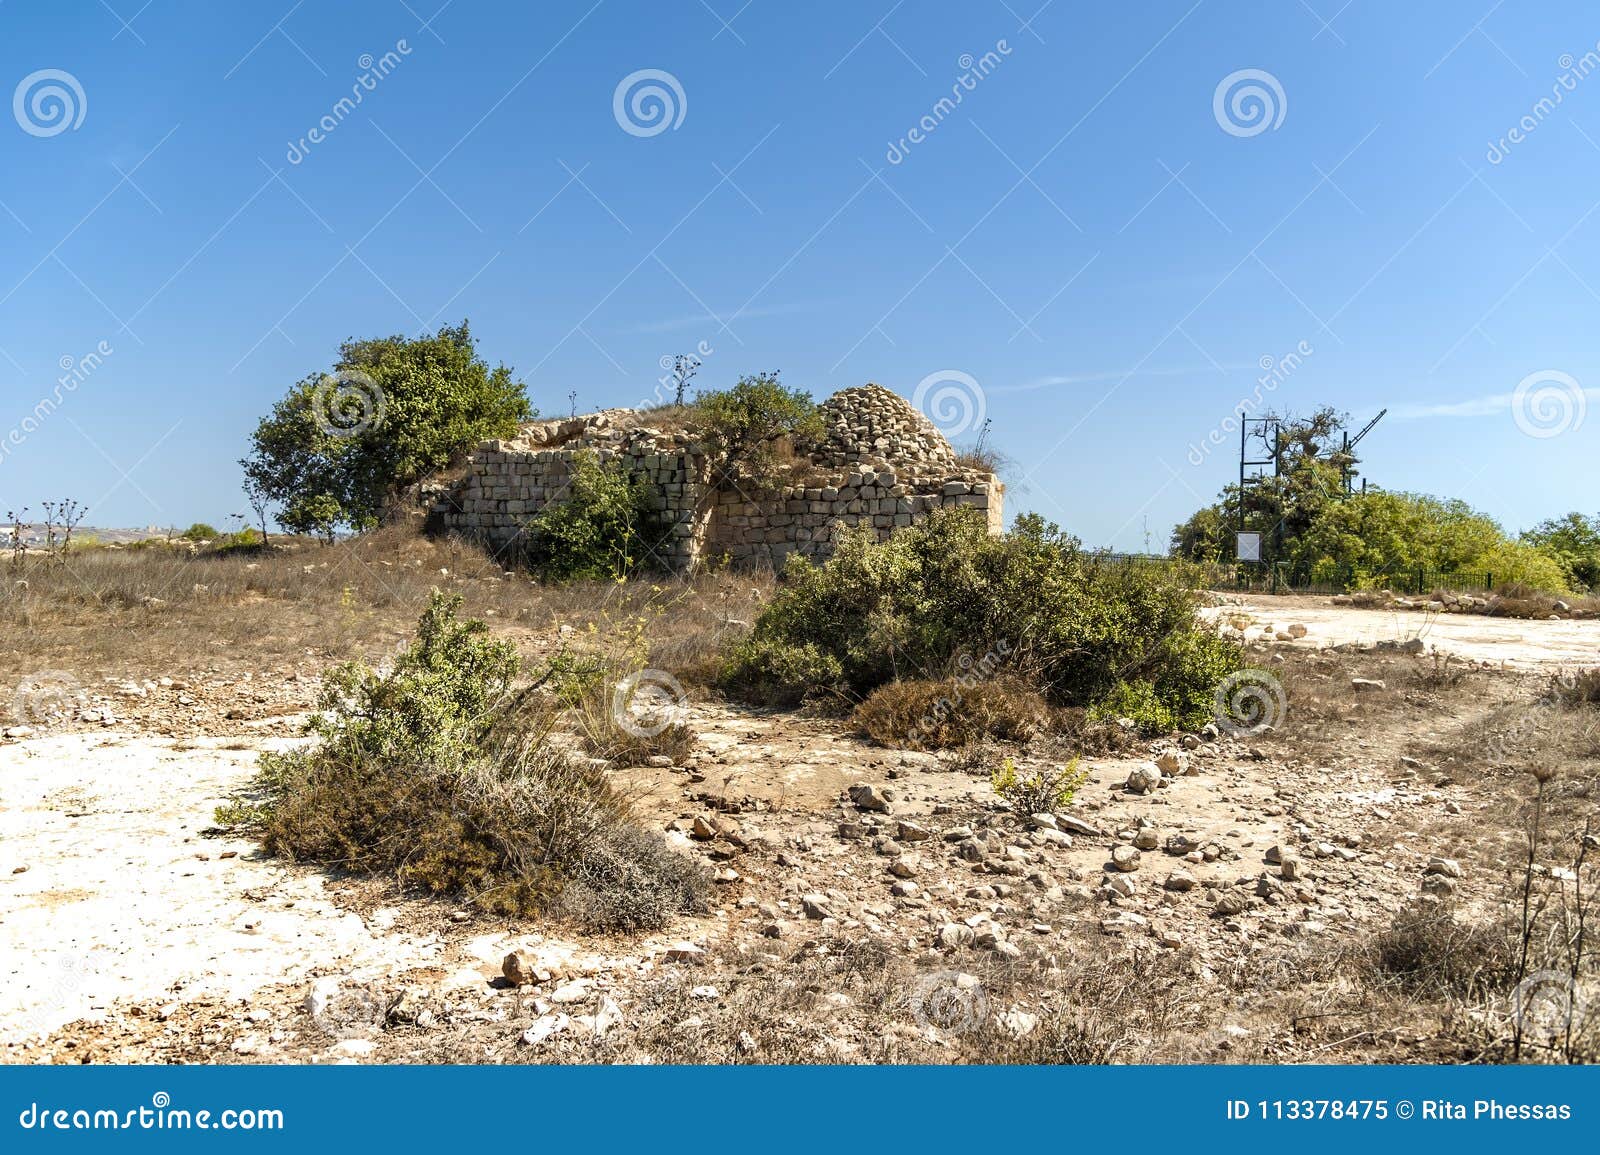 israel bethel. view of officially identified spot the rock of jacobs dream in bethel as described in genesis 28-12-19 in the old t